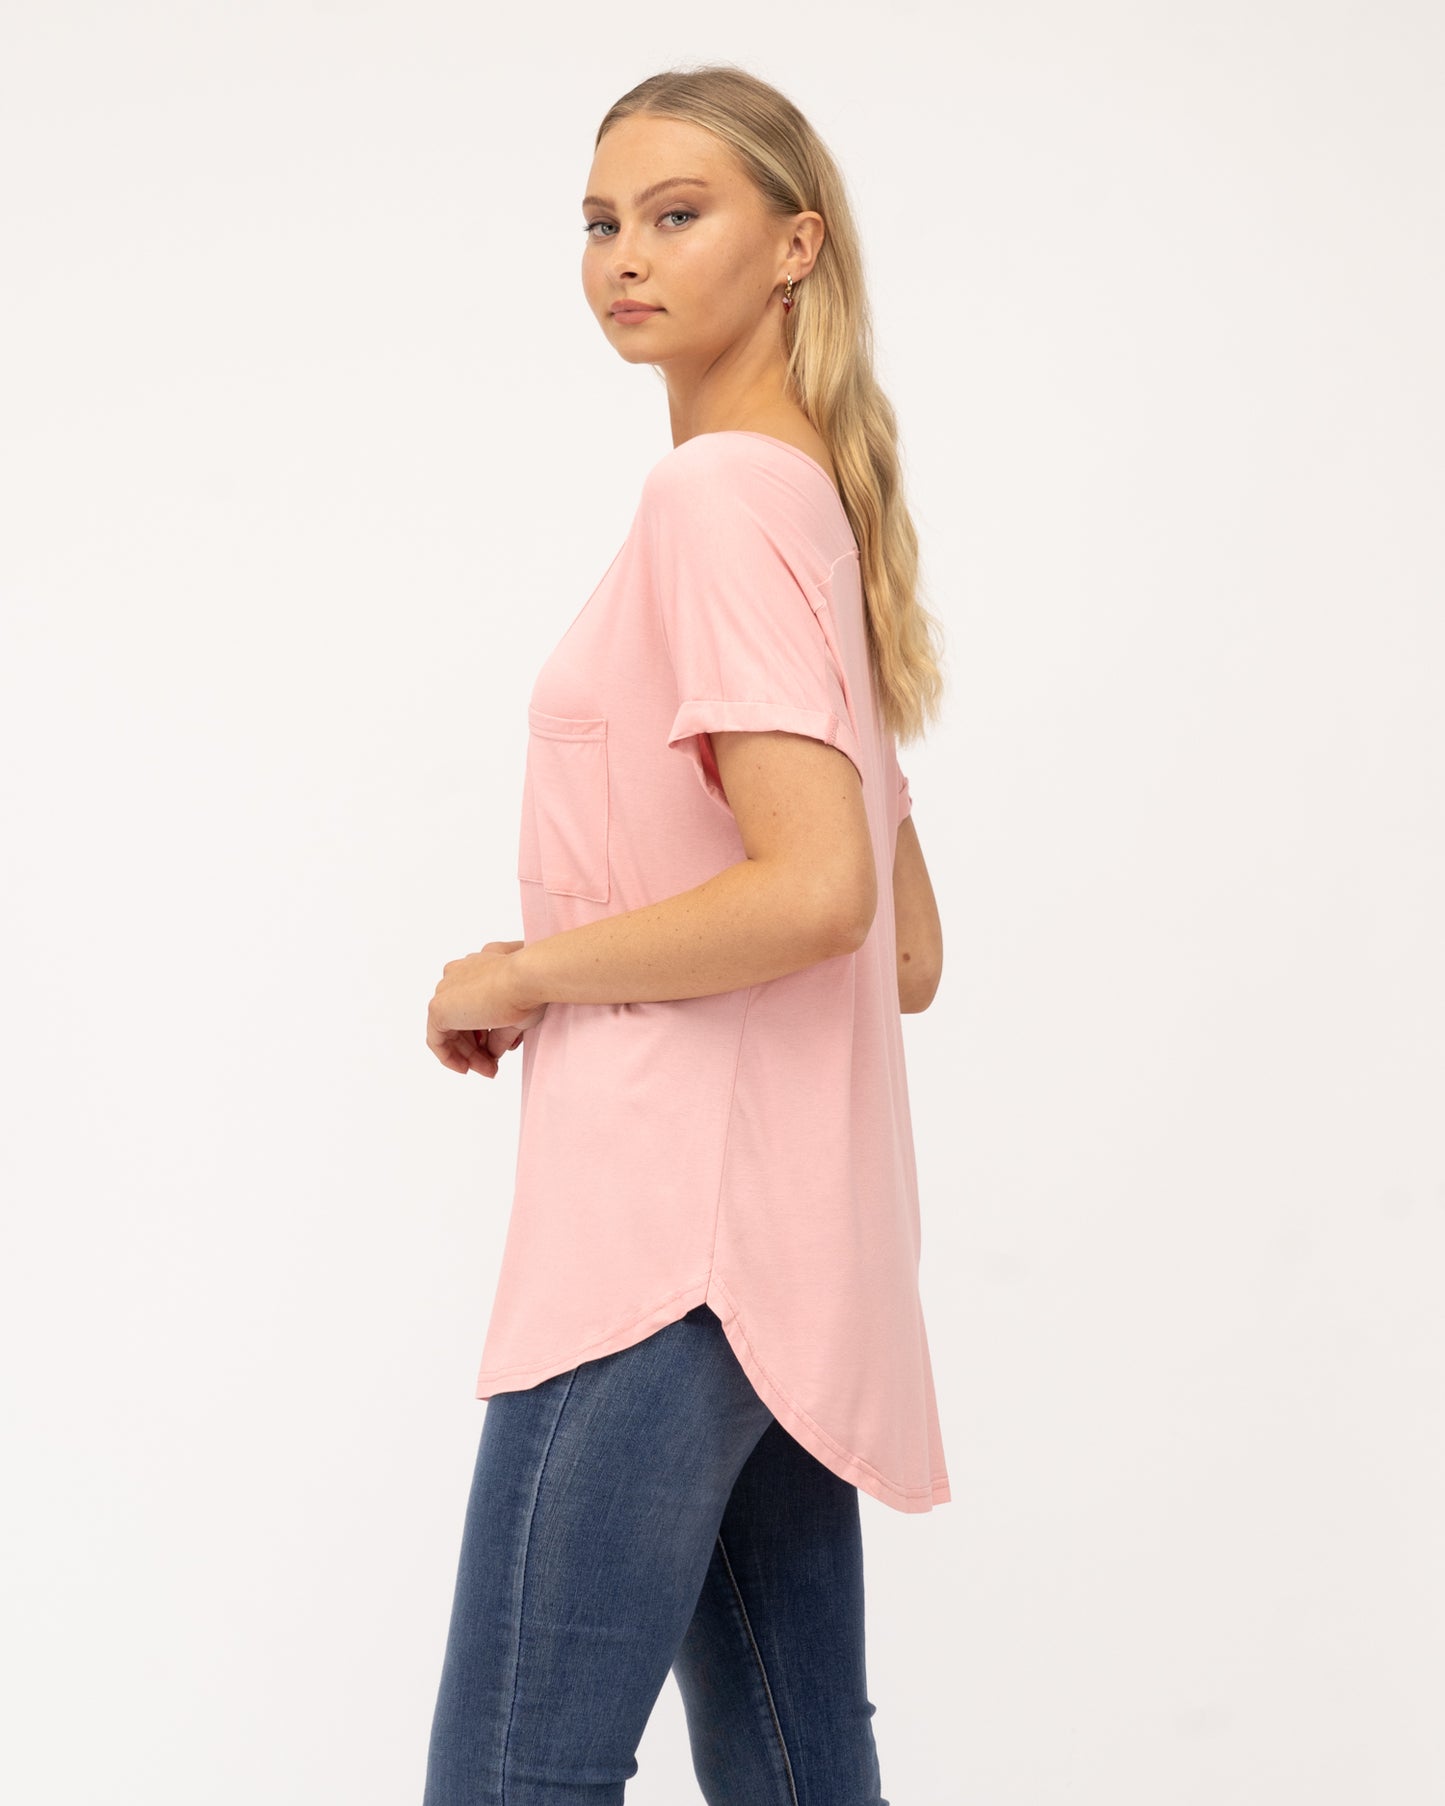 Label of Love - Tee - 7602 - Pink - 50% Off-1x L left aprox 12-14